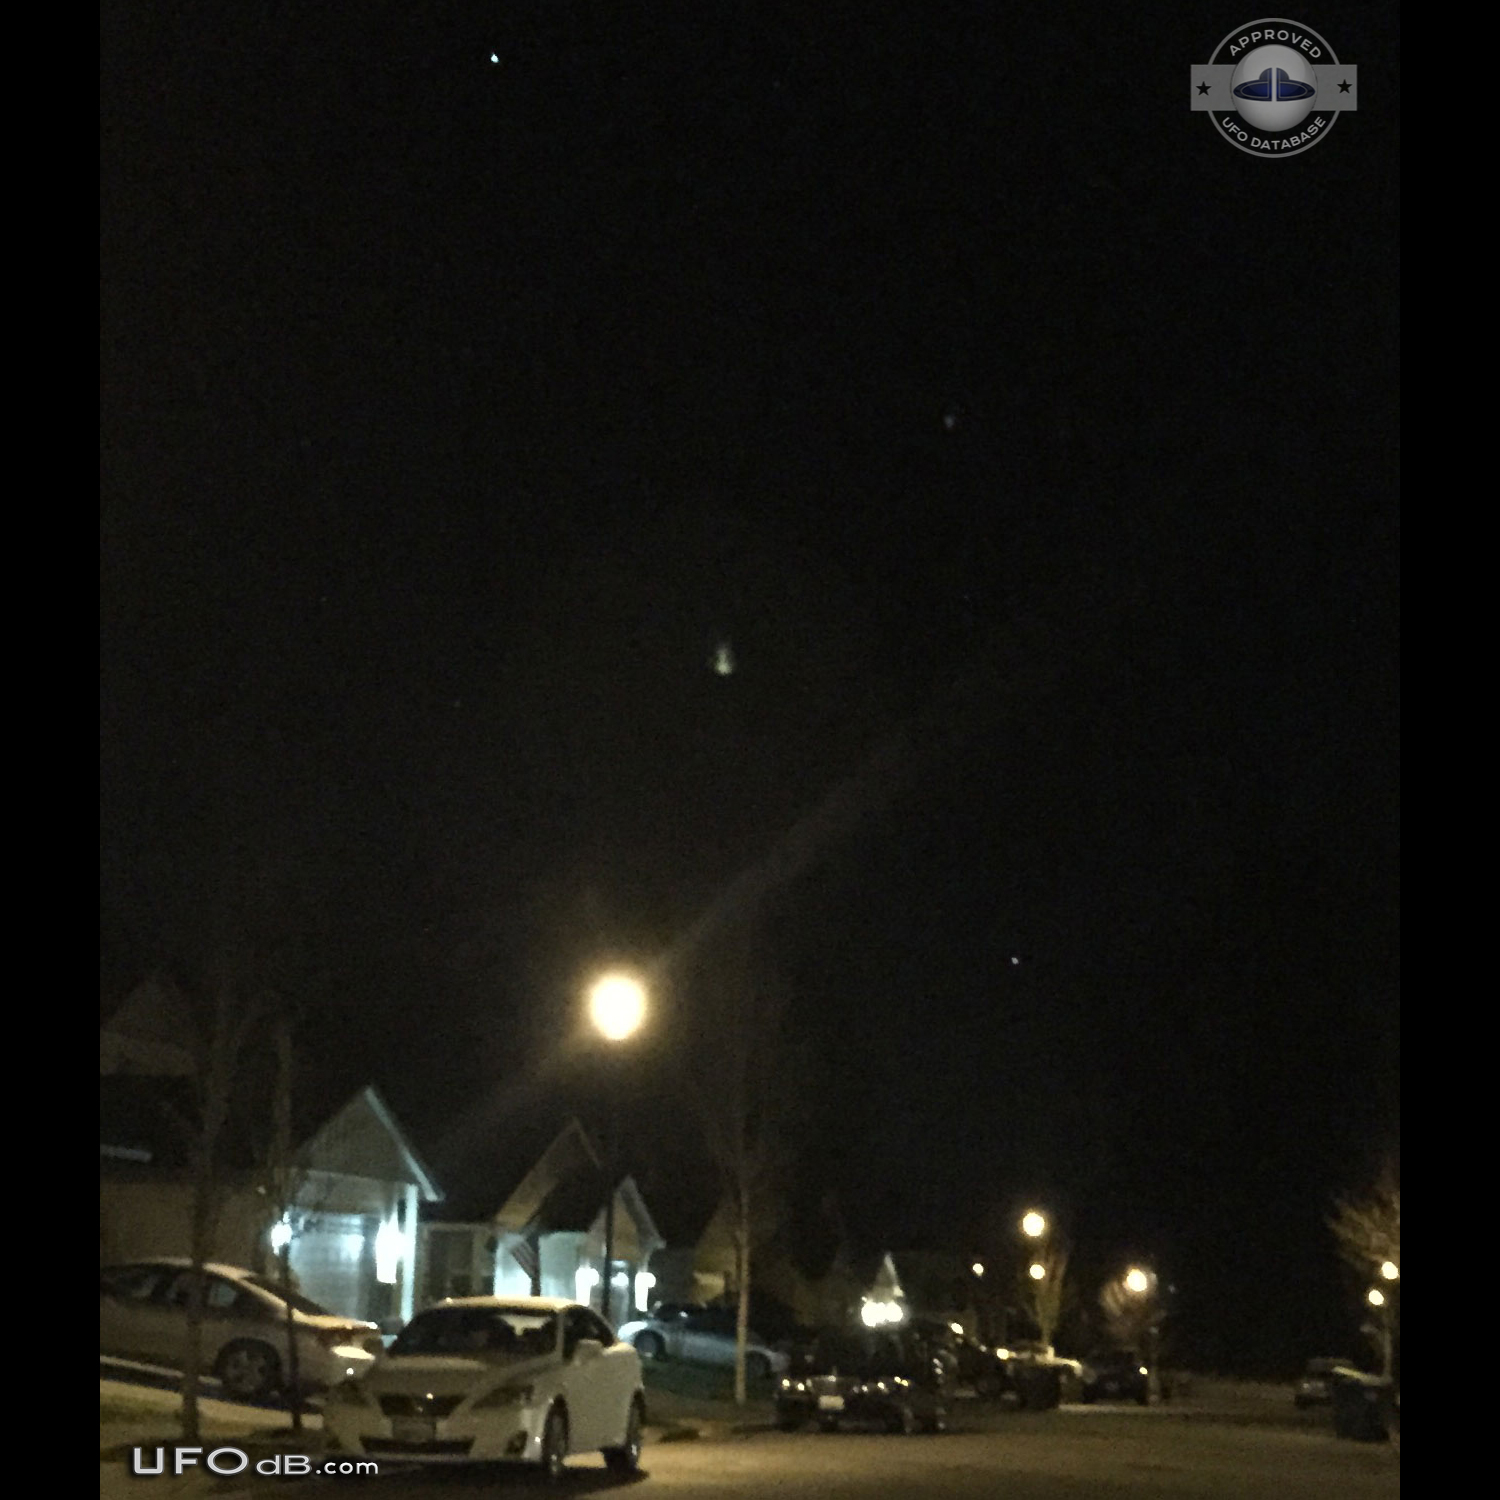 Two very very bright lights UFOs in the sky of Lacey, Washington 2015 UFO Picture #628-1